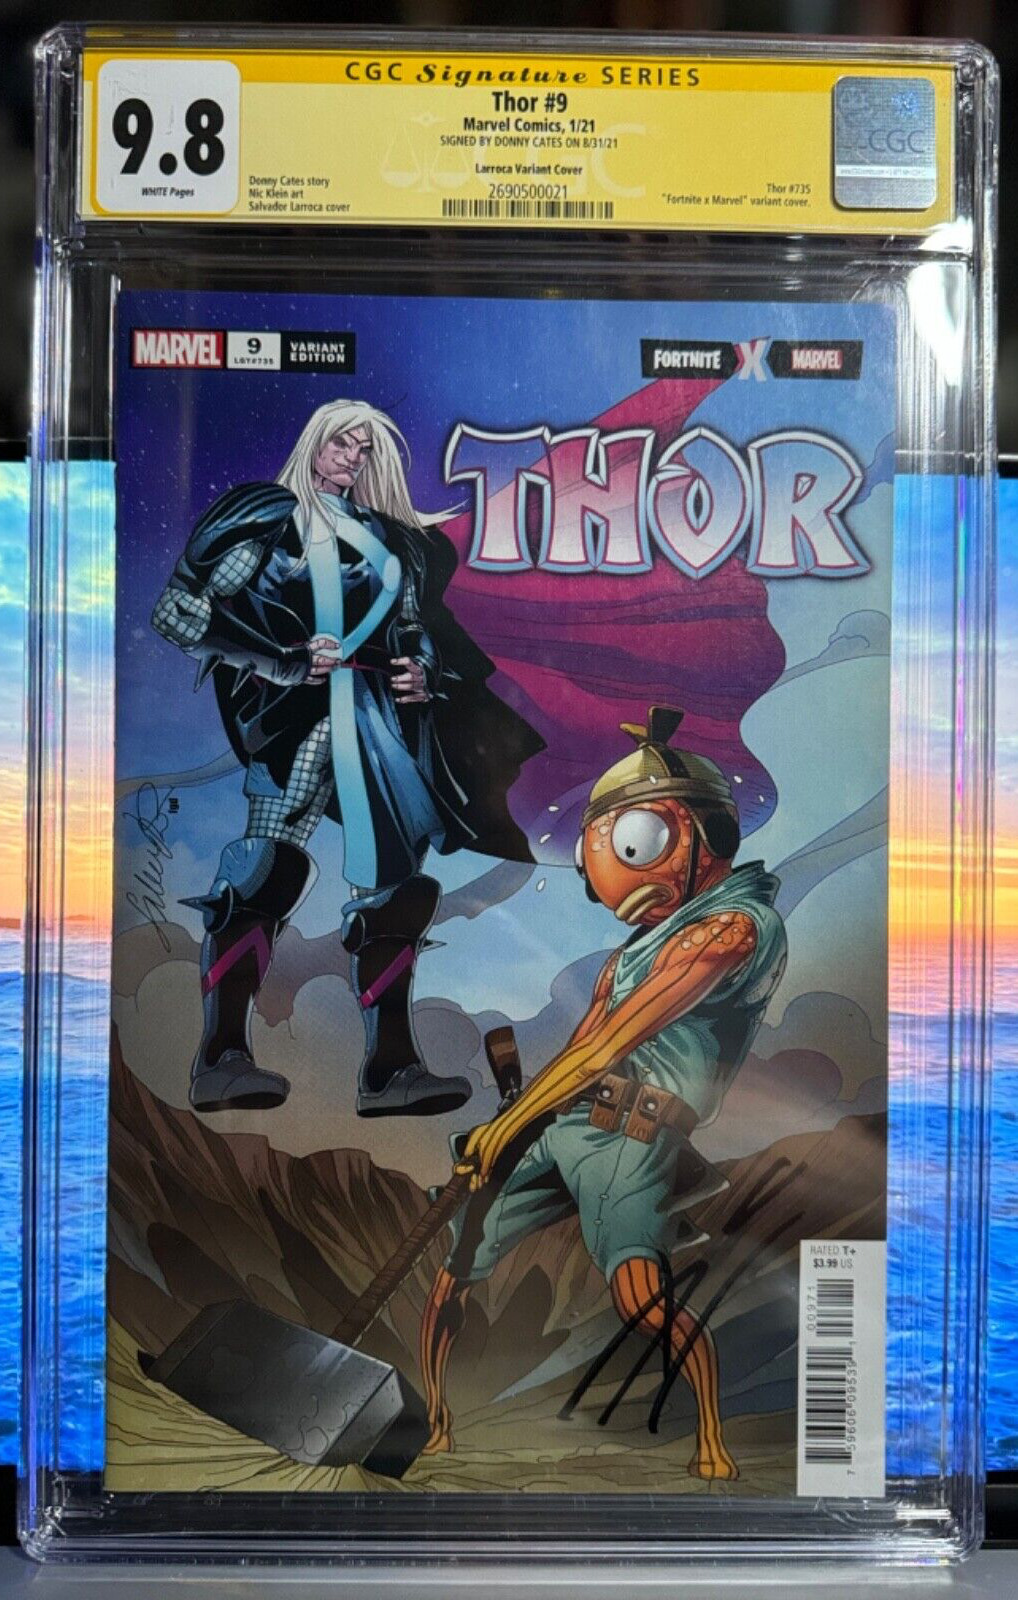 THOR #9 (2021) LARROCA VARIANT CGC 9.8 SIGNED BY DONNY CATES